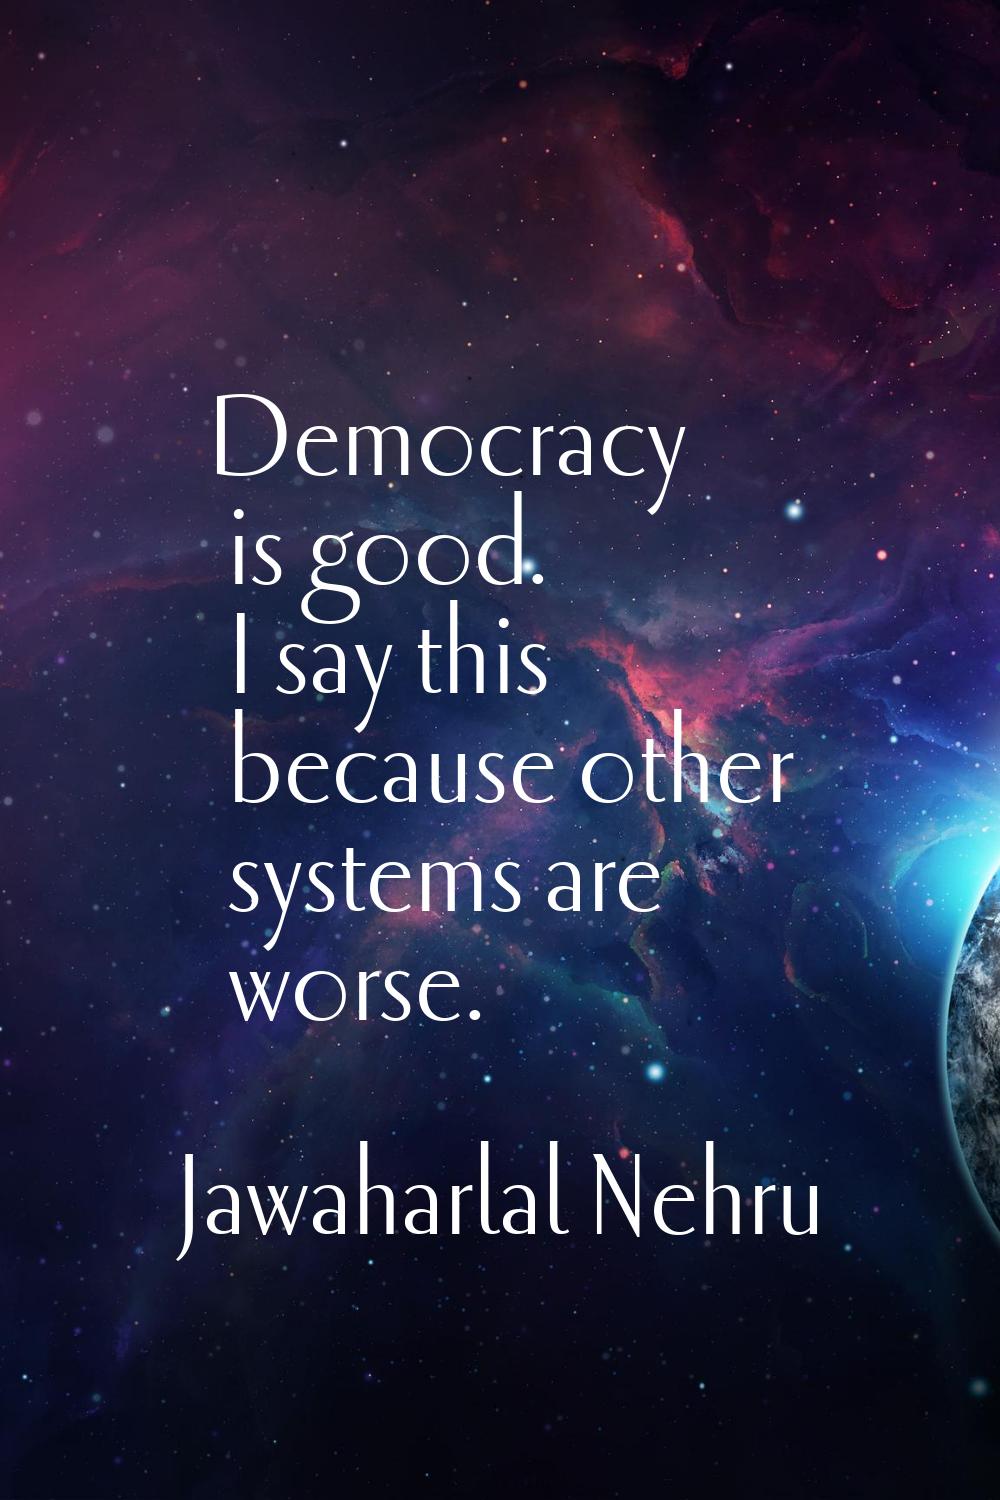 Democracy is good. I say this because other systems are worse.